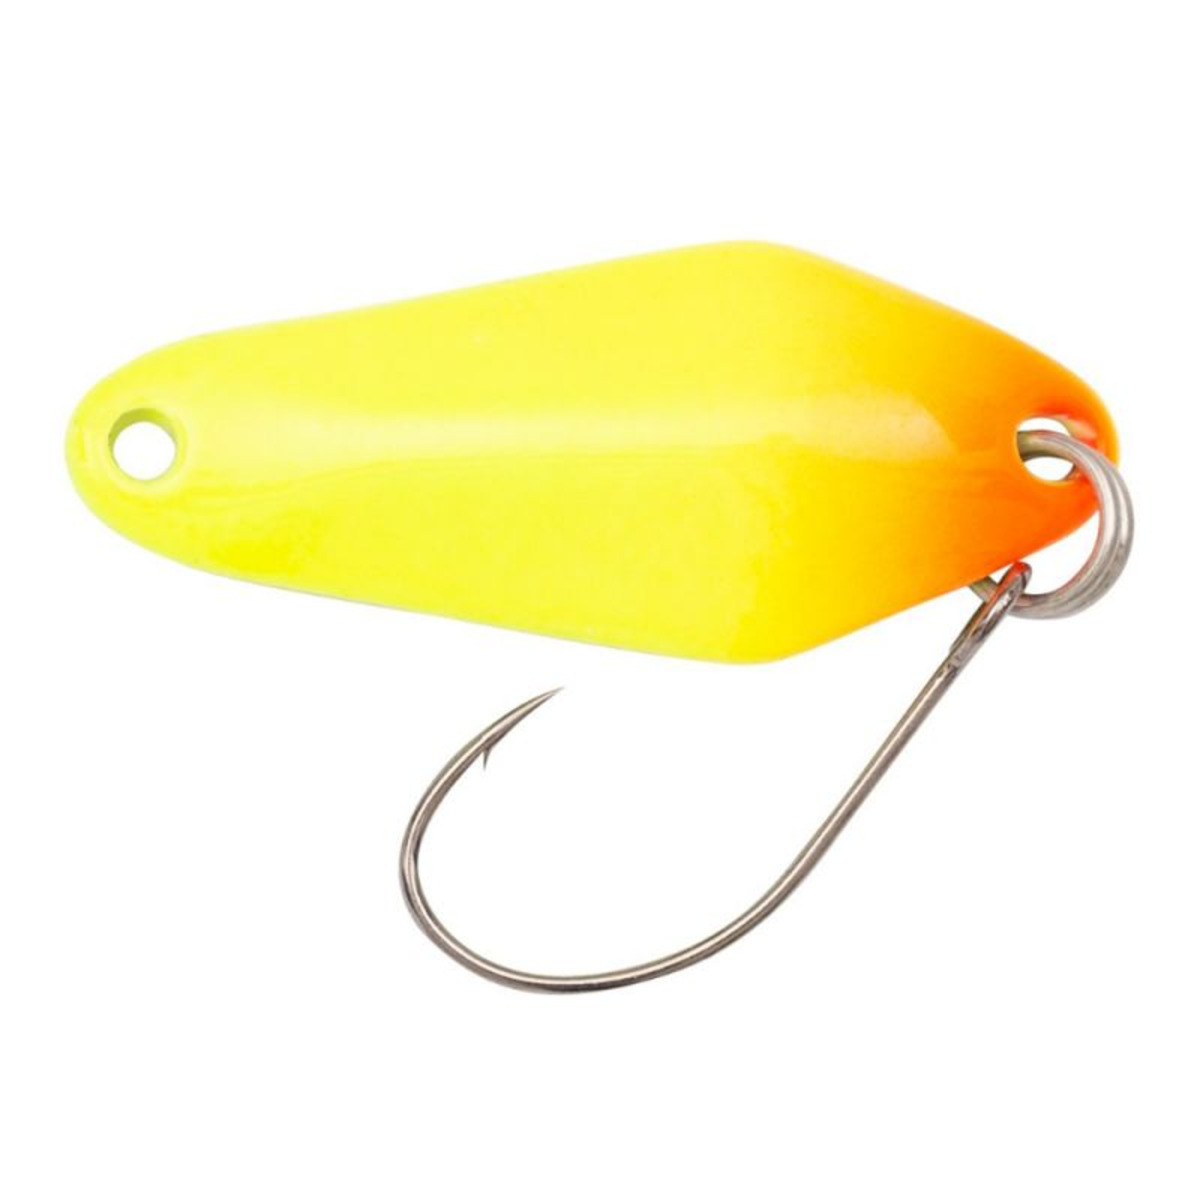 Berkley Area Game Spoons Chisai - 1.8 g - 2.00 cm - Orange Tip-Chartreuse-Gold